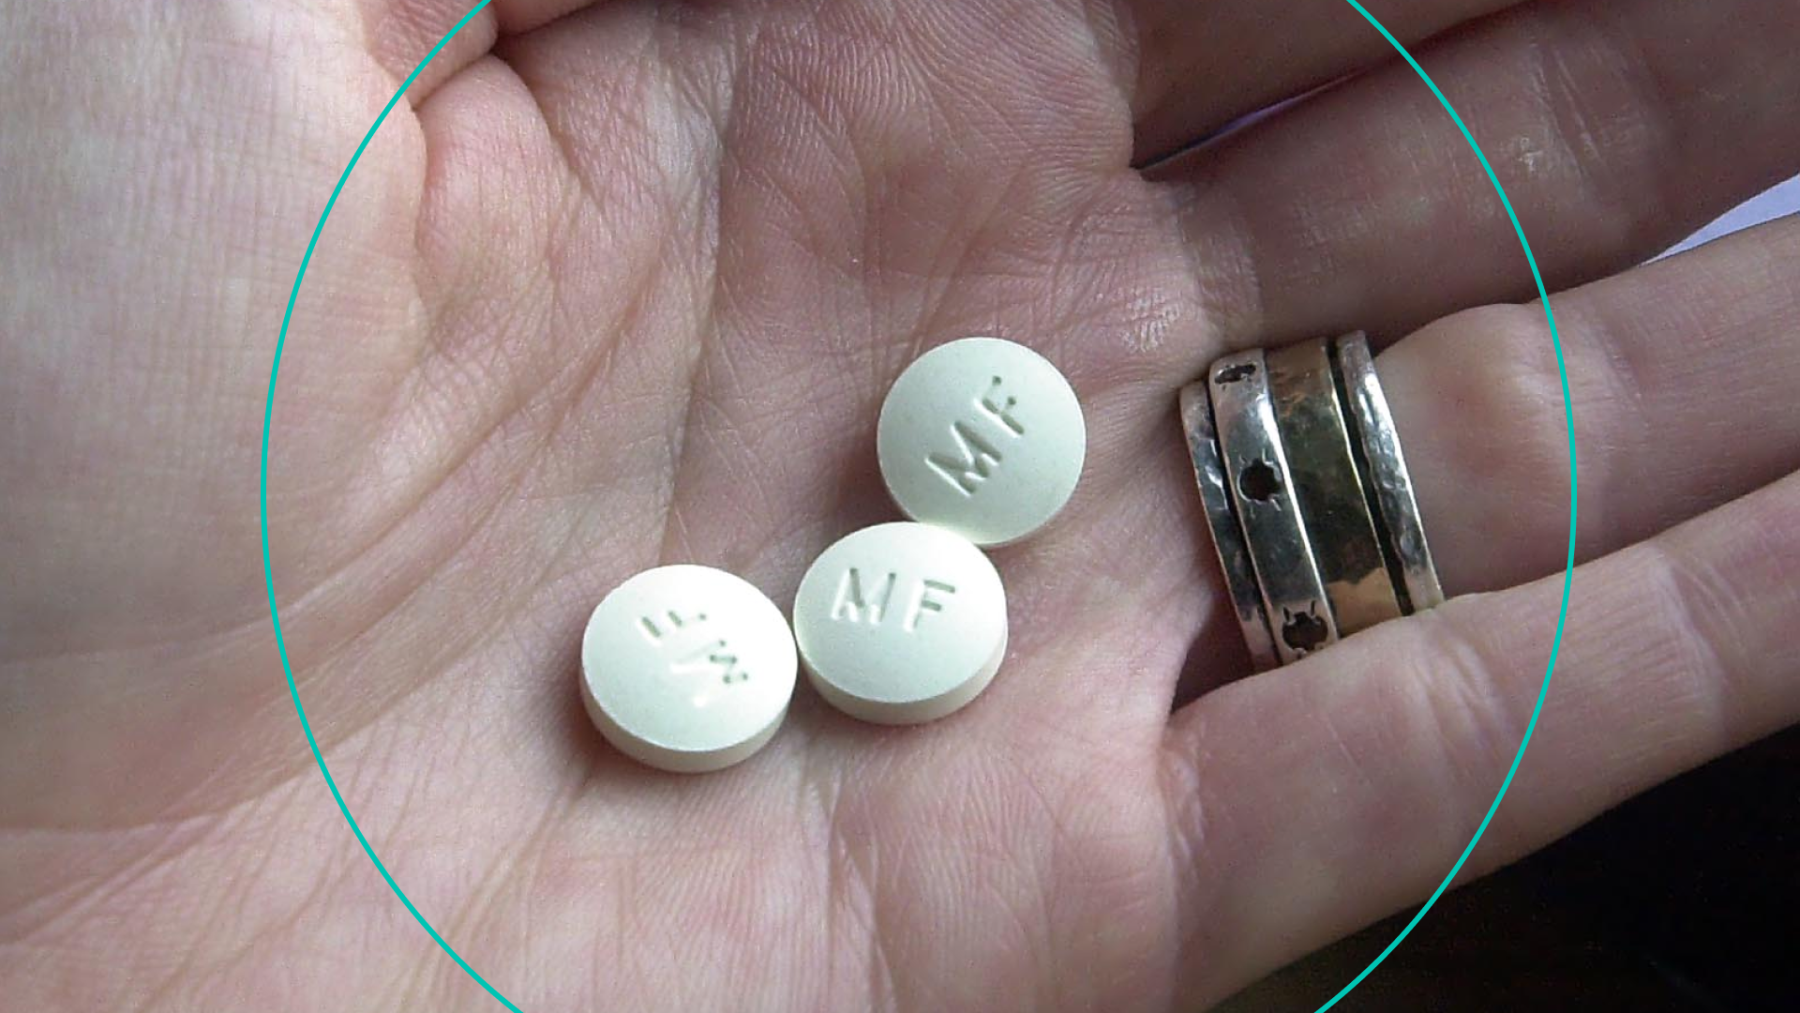 Pills of mifepristone, the first of two medications used to end pregnancies.